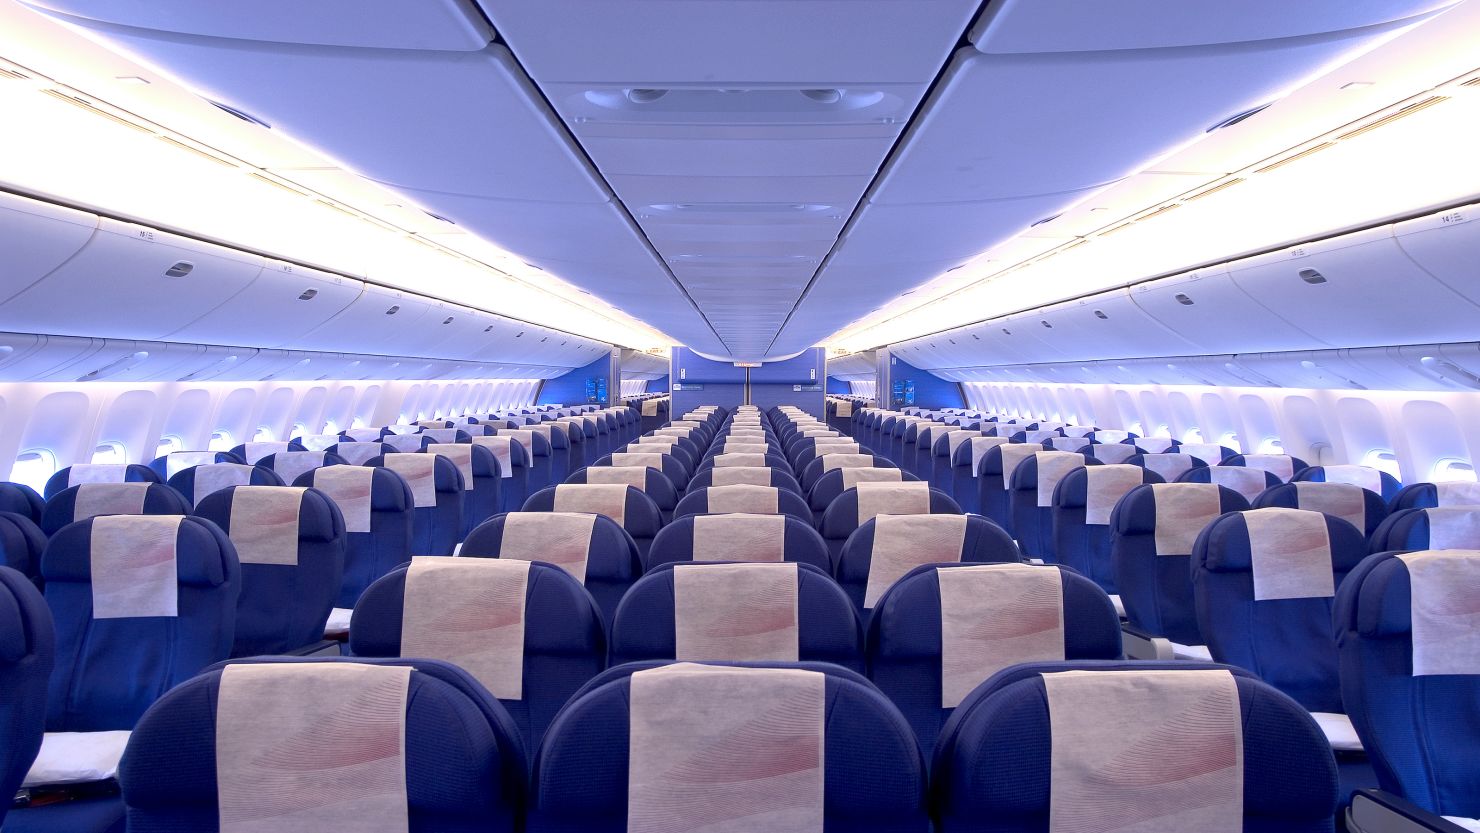 6 Products to Make Airline Travel More Comfortable